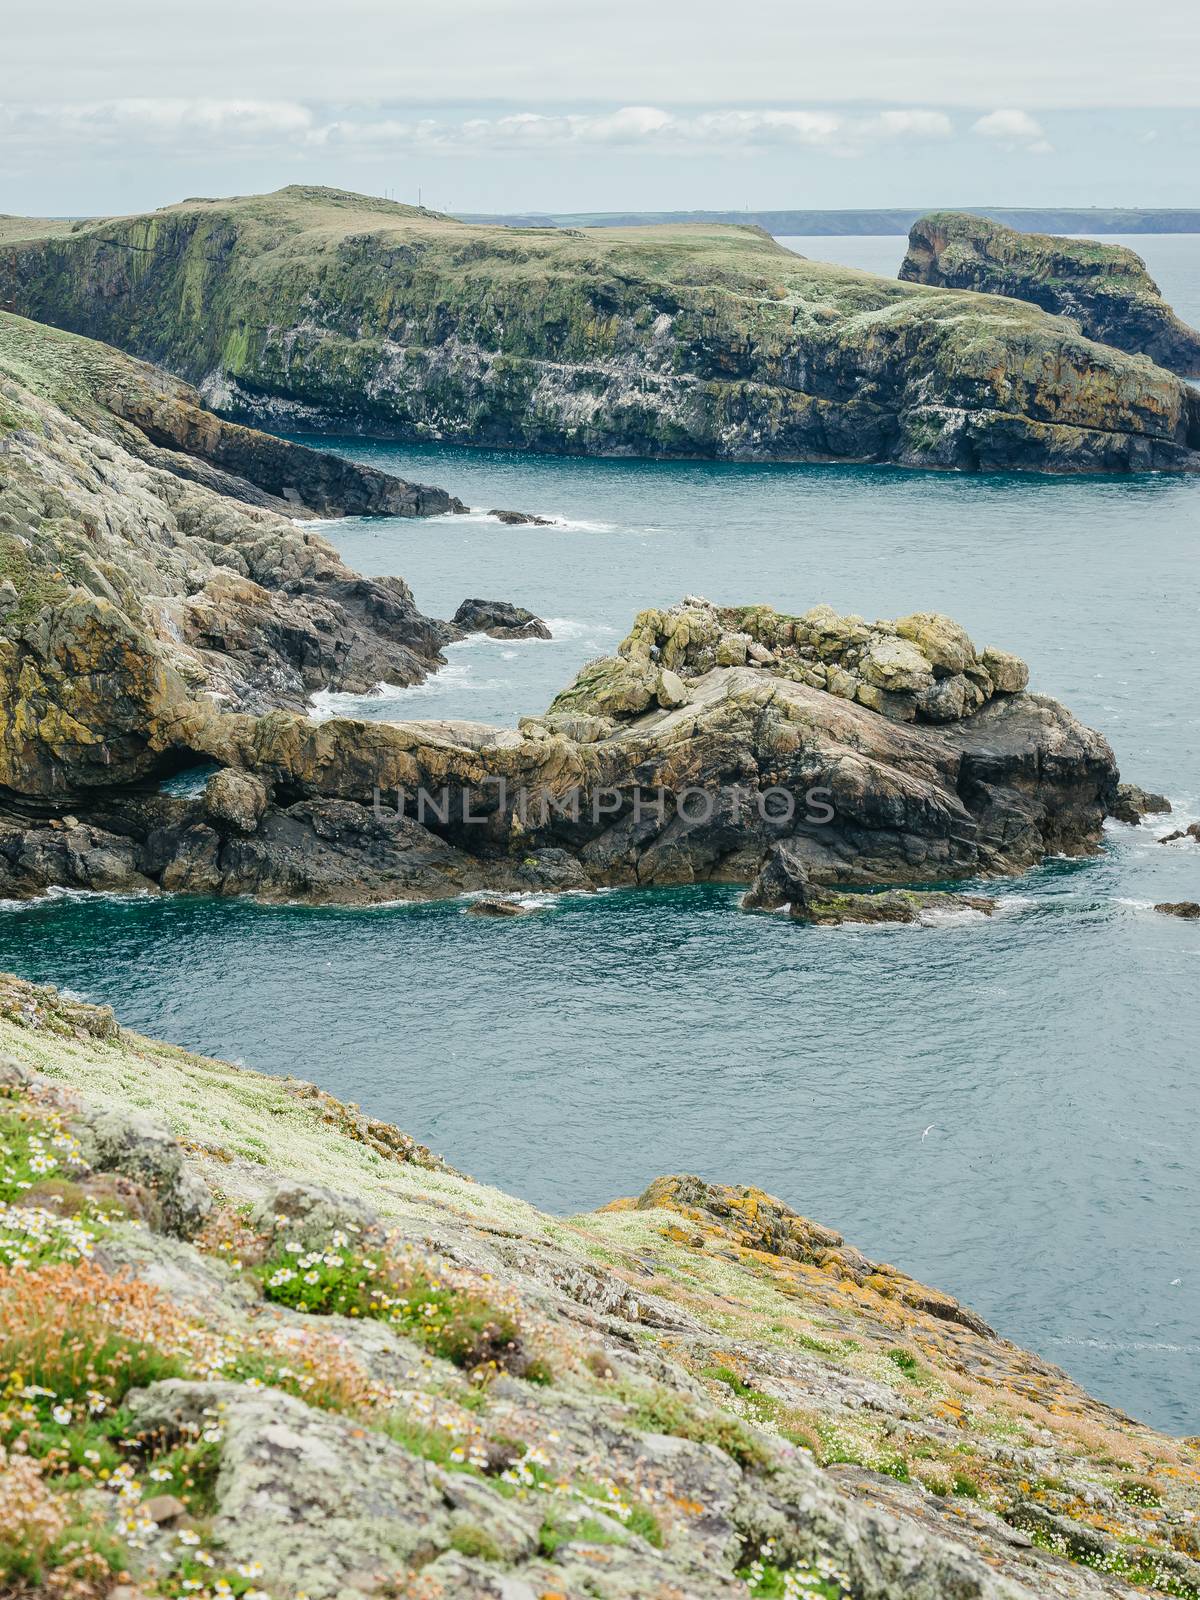 Stunning view over the rocky coastline of Skomer Island marine nature reserve on a sunny summer day - Pembrokeshire West Wales UK. by tamas_gabor